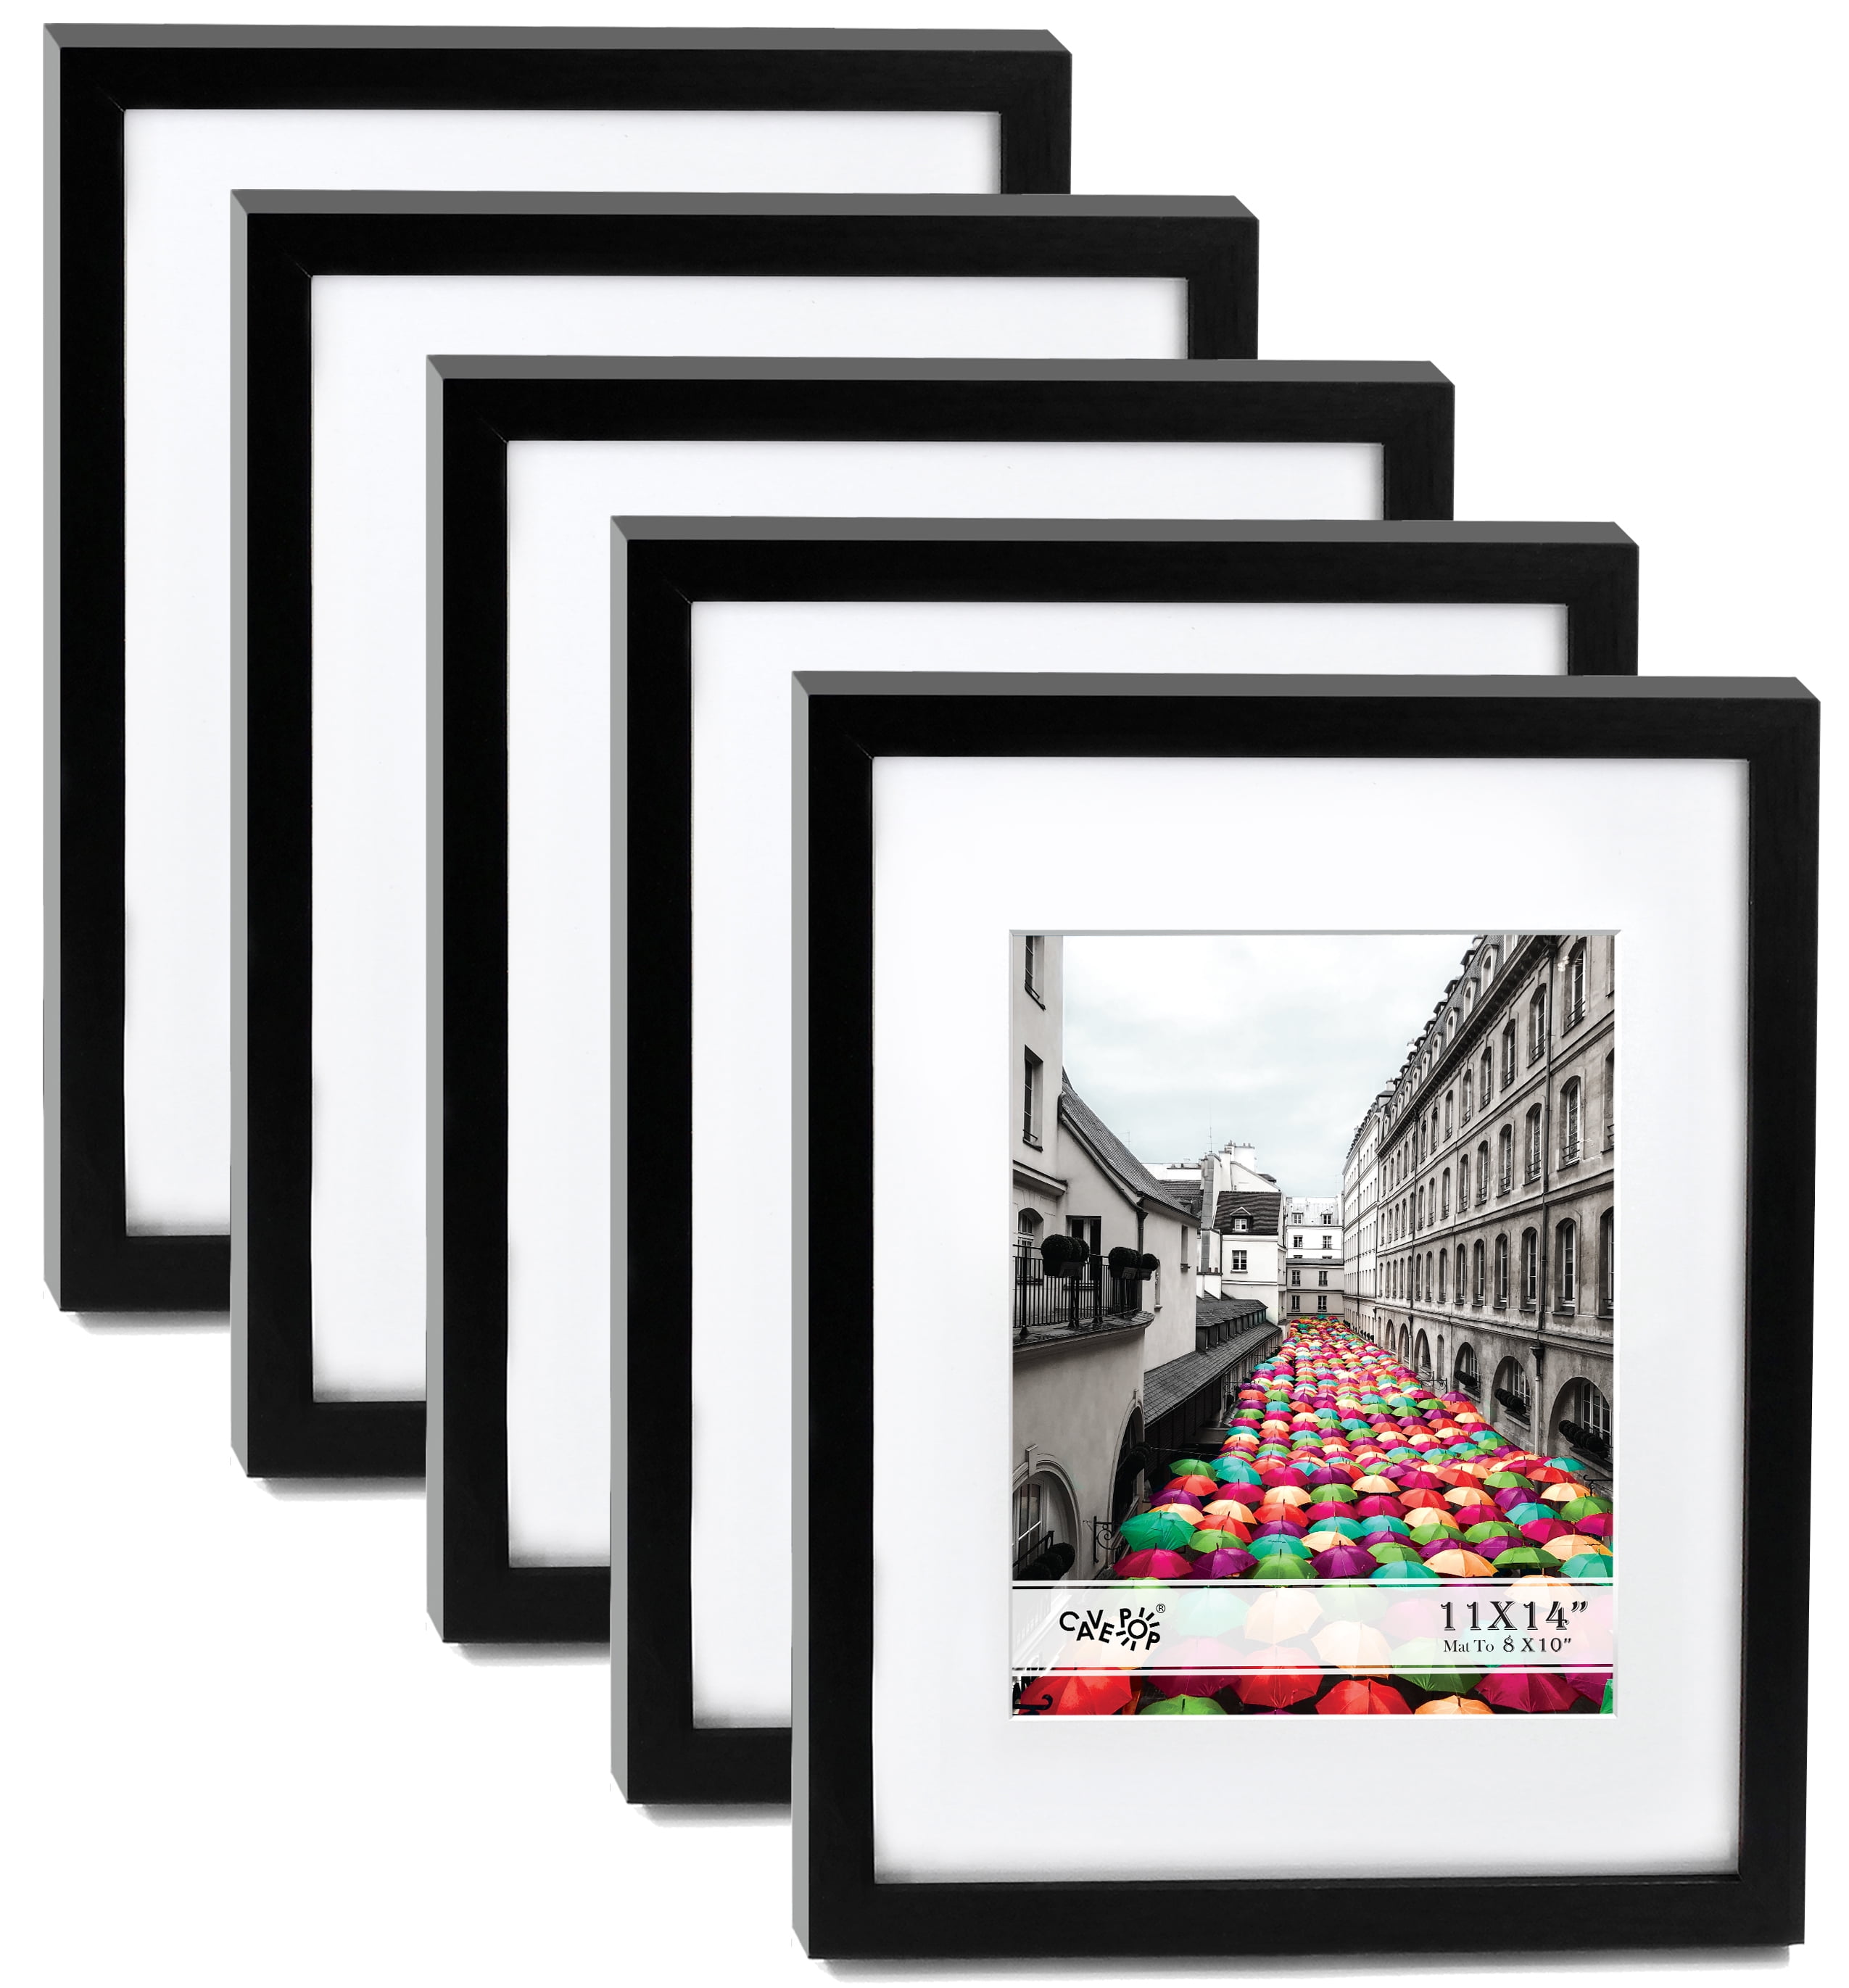 Details about   White & Black Large New Photo Picture Frames With White Ivory or Black Mounts 